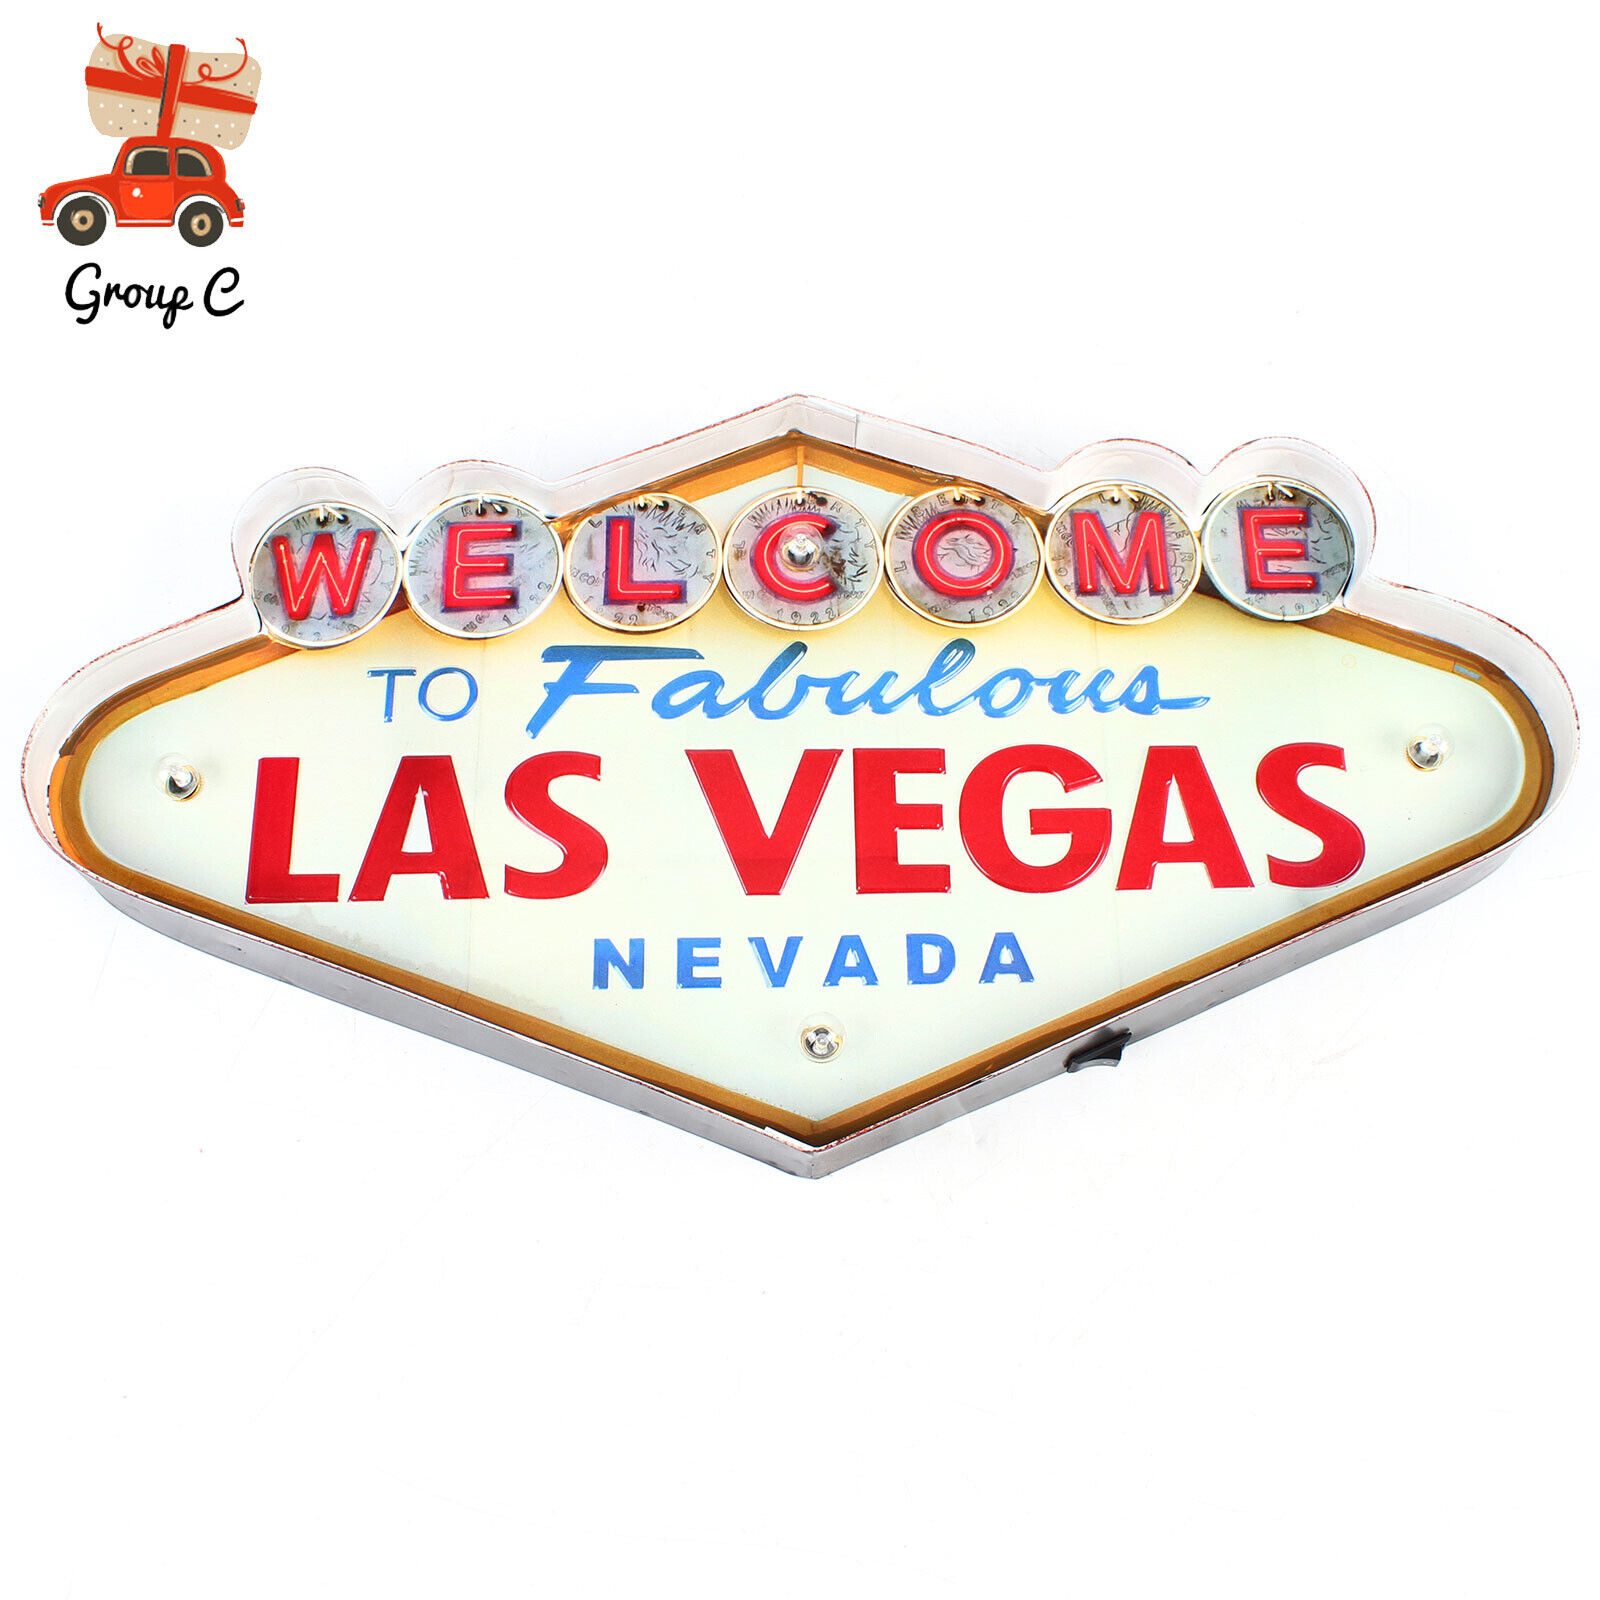 Vintage LED Light Metal Neon Signs Welcome to Las Vegas Pub Cafe Wall Decor